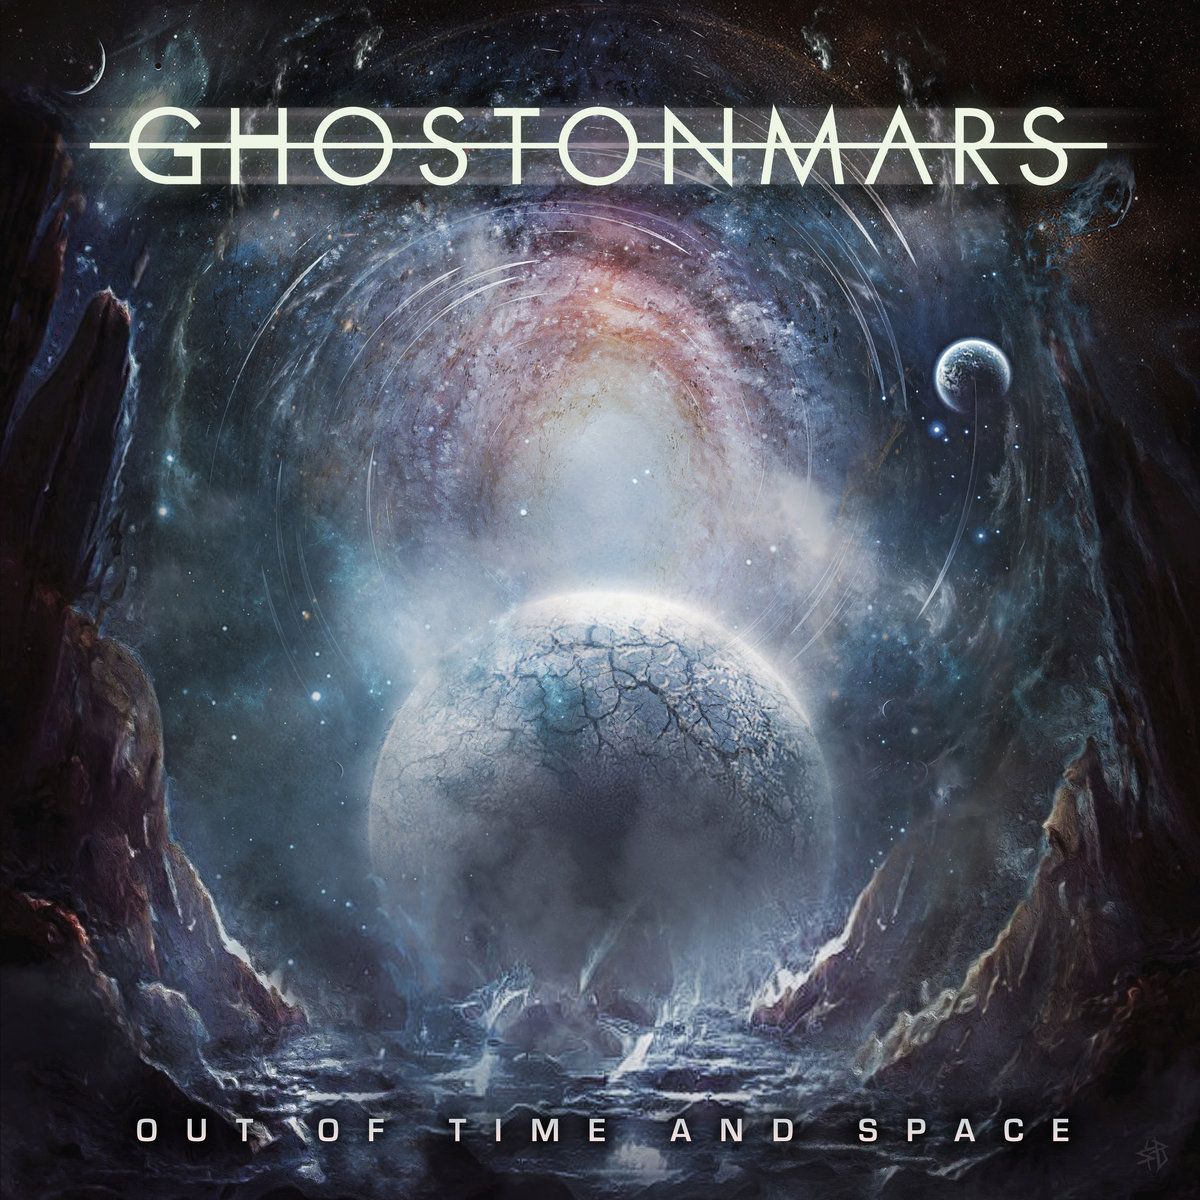 Prog Metal newcomers GHOST ON MARS released their debut album 'Out of Time and Space' on May 3, 2024 via Willowtip Records.Thoughts? #ghostonmars #outoftimeandspace #progressivemetal #willowtiprecords #progmetal #metalcore #heavymetal #metaltwitter @ghostonmarsoffi @Willowtip